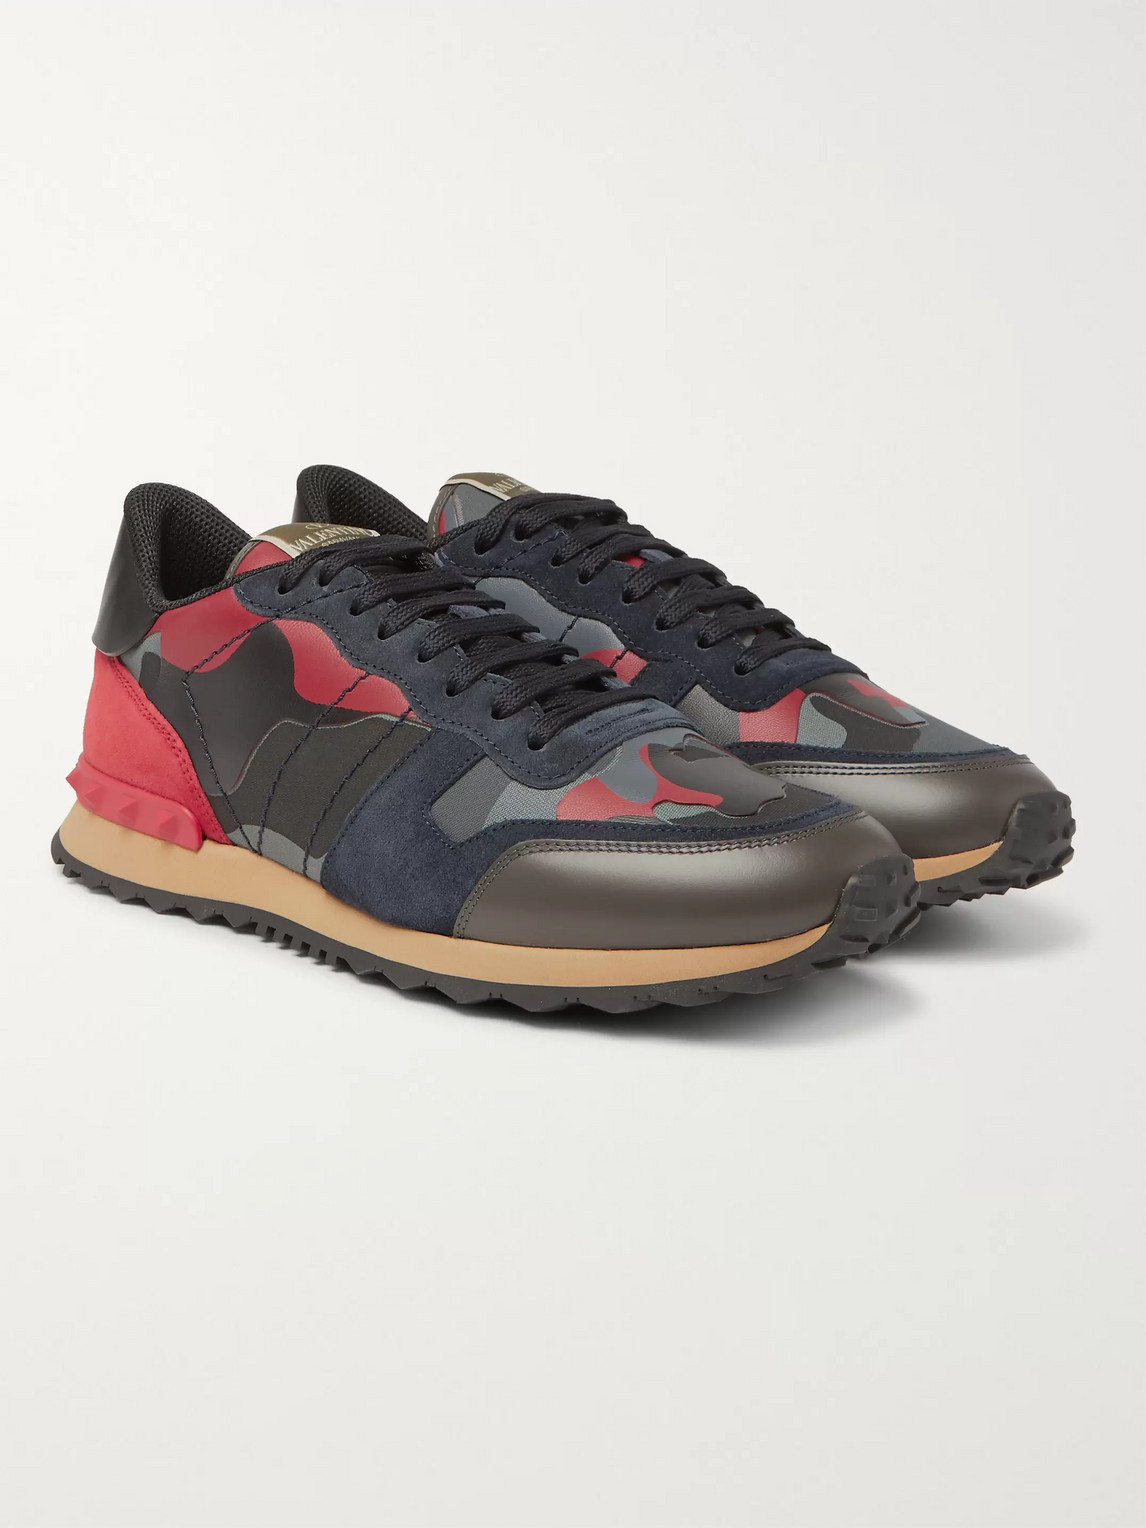 Valentino Garavani Rockrunner Camouflage Sneakers In Red And Blue